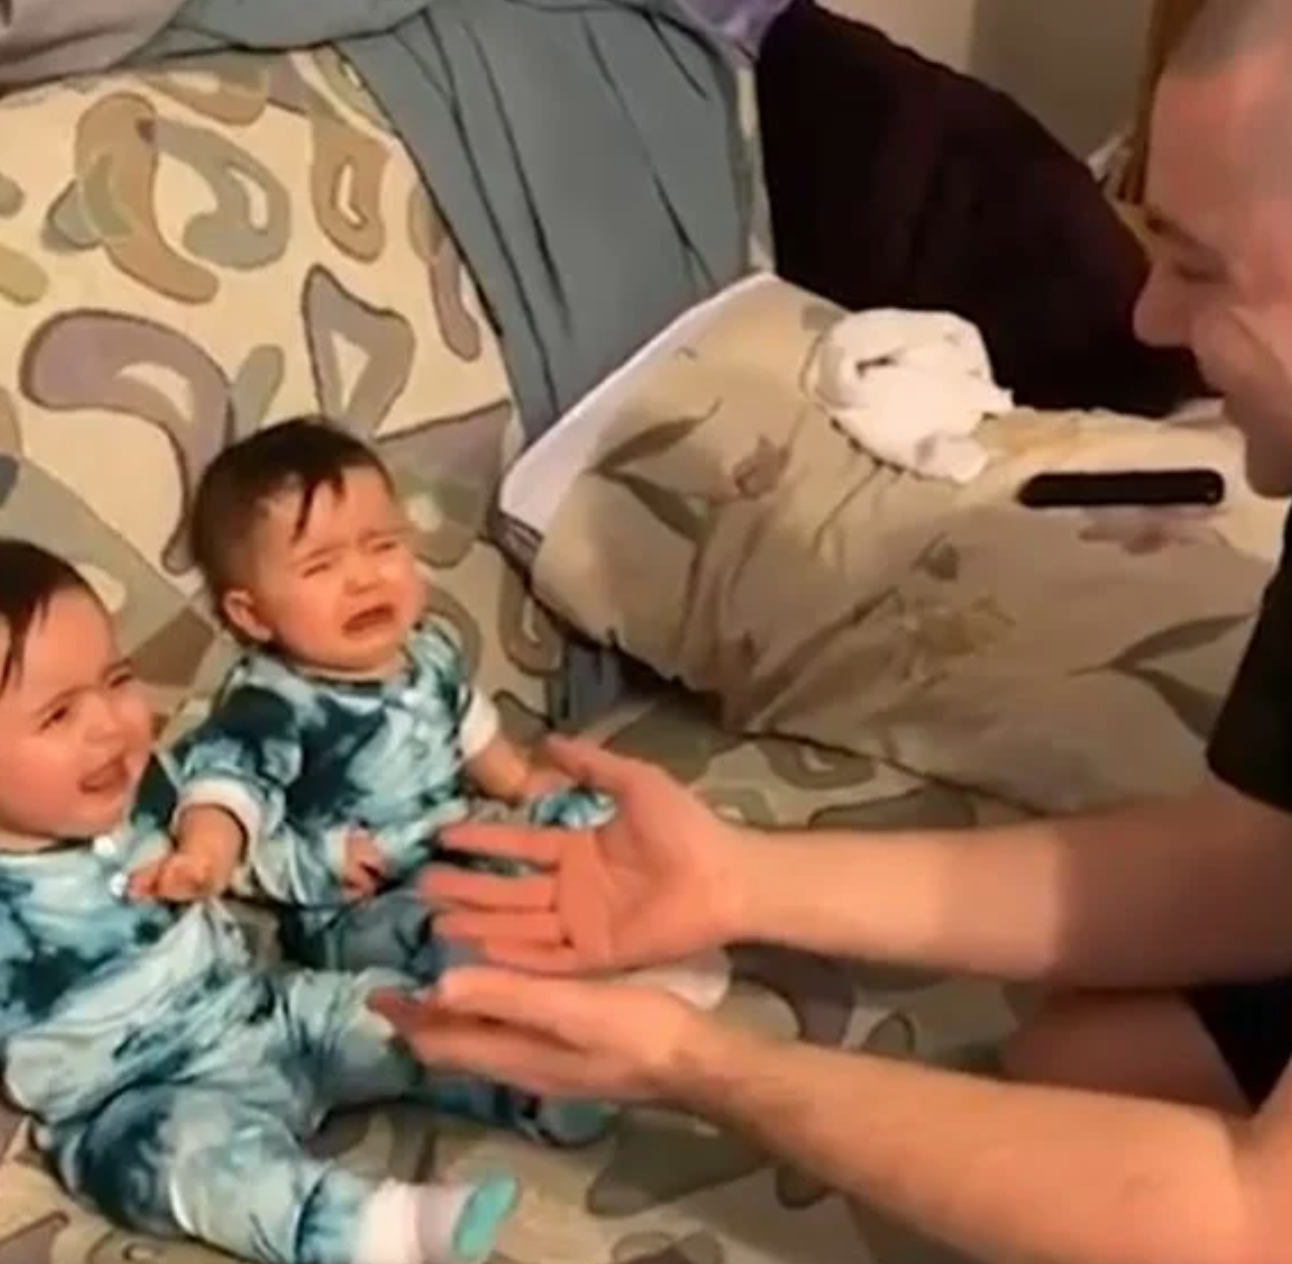 Twin Babies Freak Out at Dad’s Clean-Shaven Face in Viral Video, One More Reason We’re Never Shaving Again (Or Having Kids)